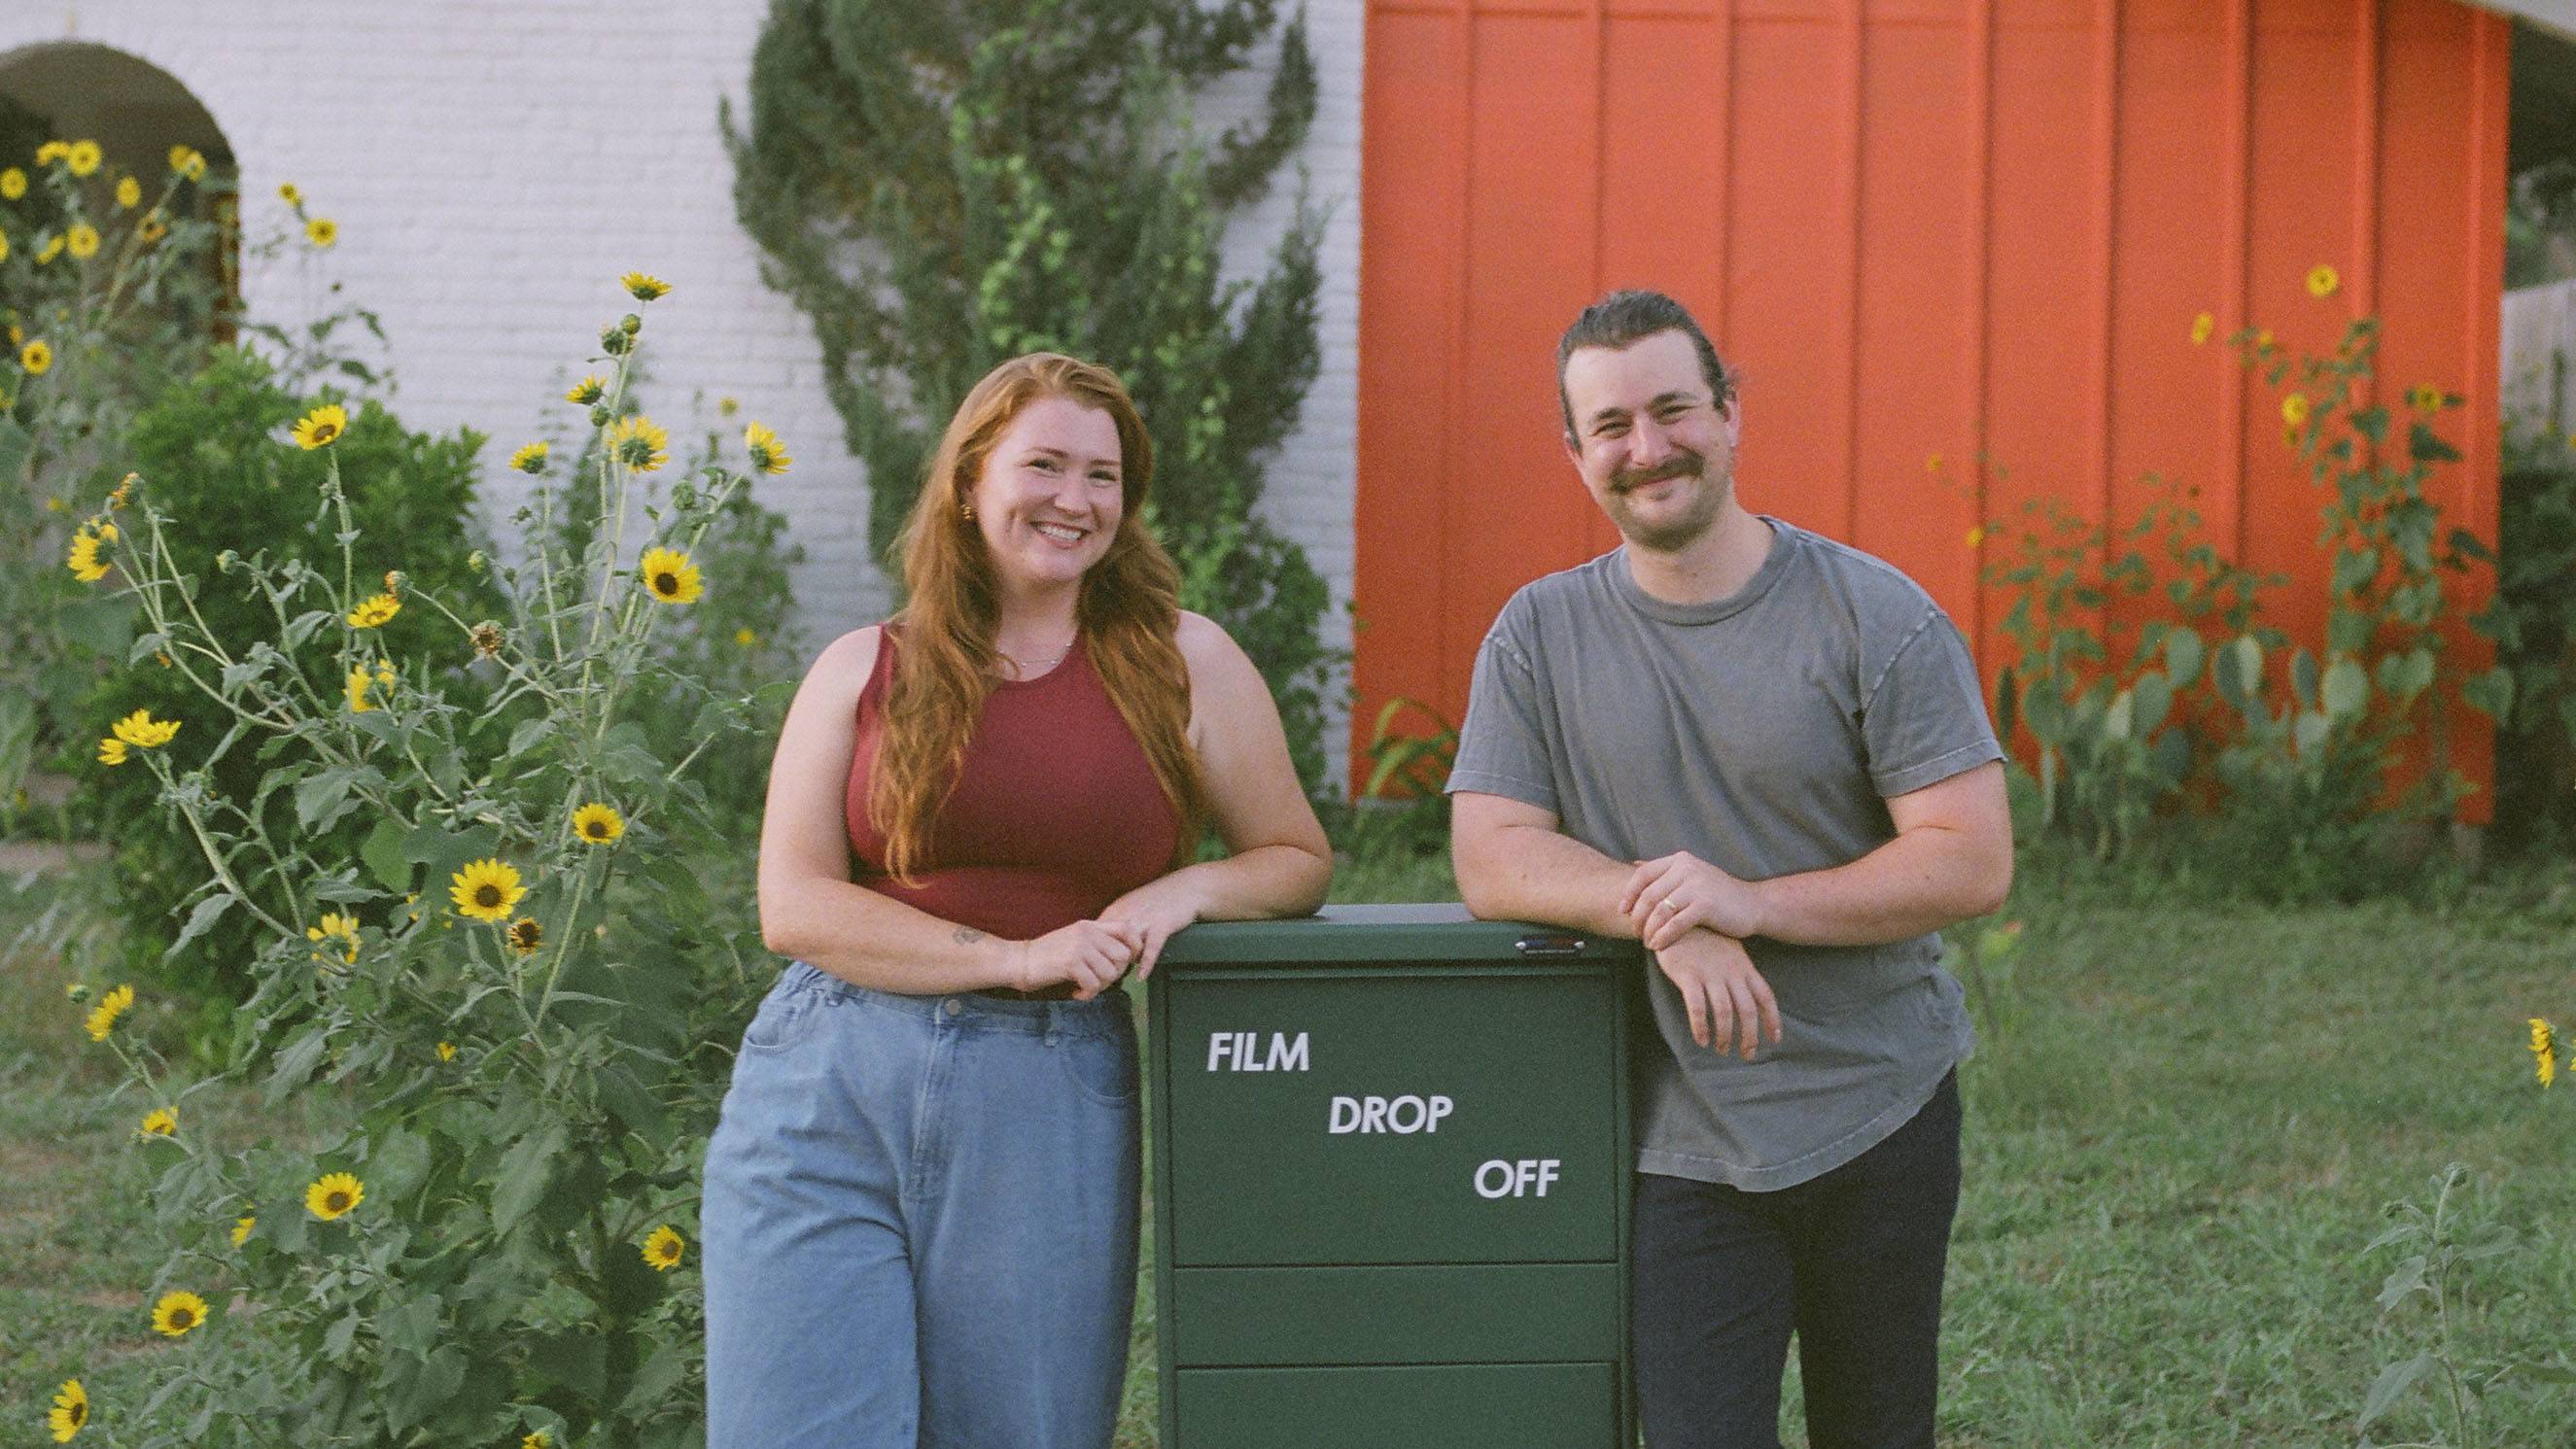 Texas State University alum Holly McVeety-Mill (left) and husband AJ Gerstenhaber stand next to their film drop box outside their home in Austin.